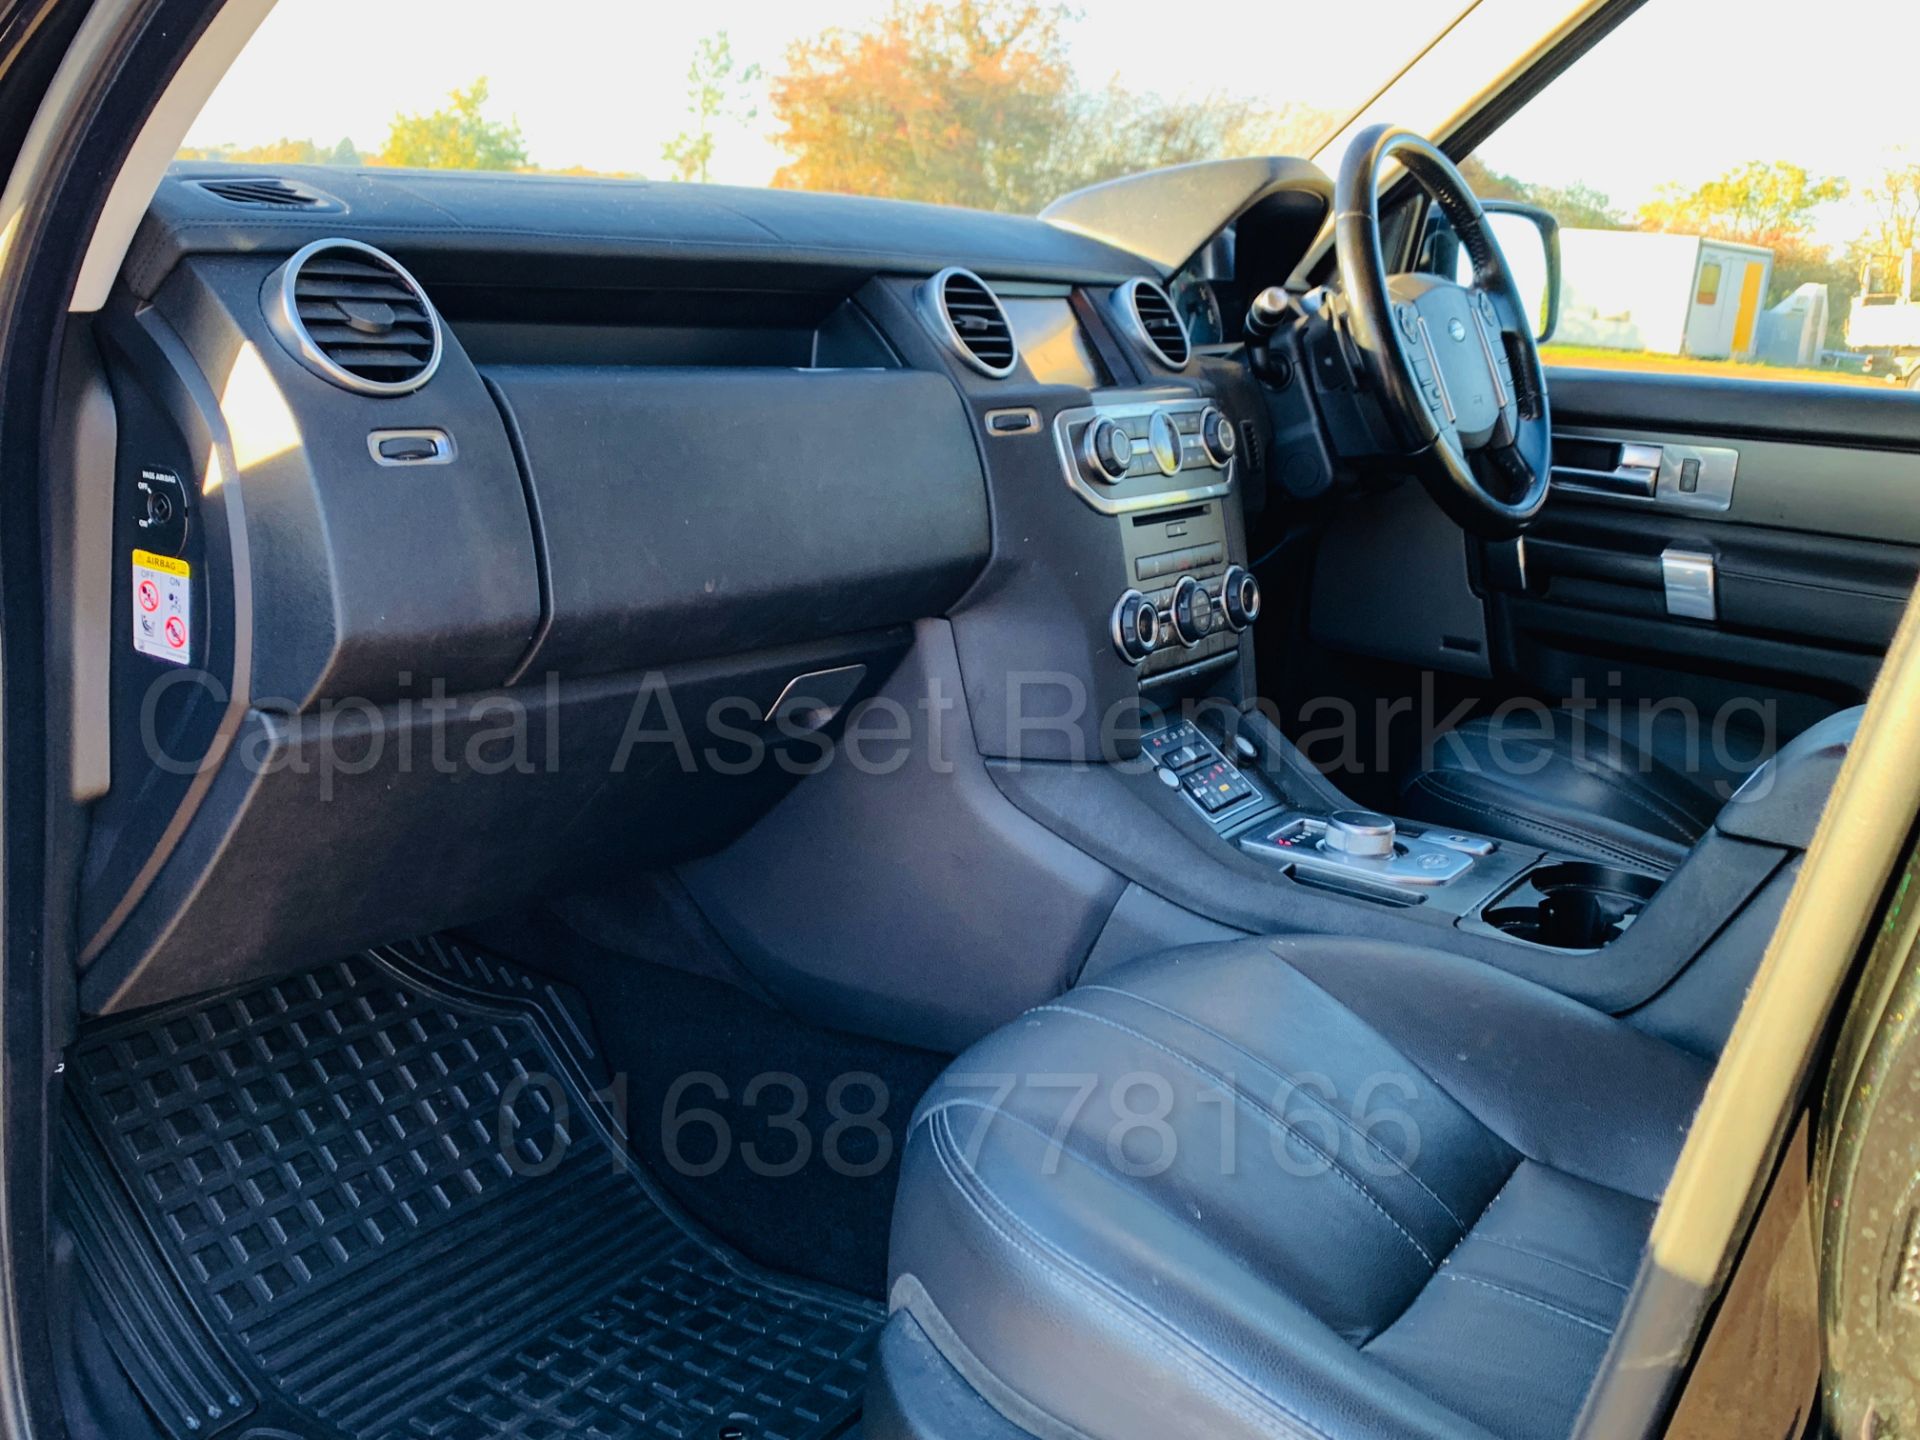 (On Sale) LAND ROVER DISCOVERY 4 (63 REG) '3.0 SDV6 - 8 SPEED AUTO' *LEATHER & SAT NAV* *TOP SPEC* - Image 22 of 47